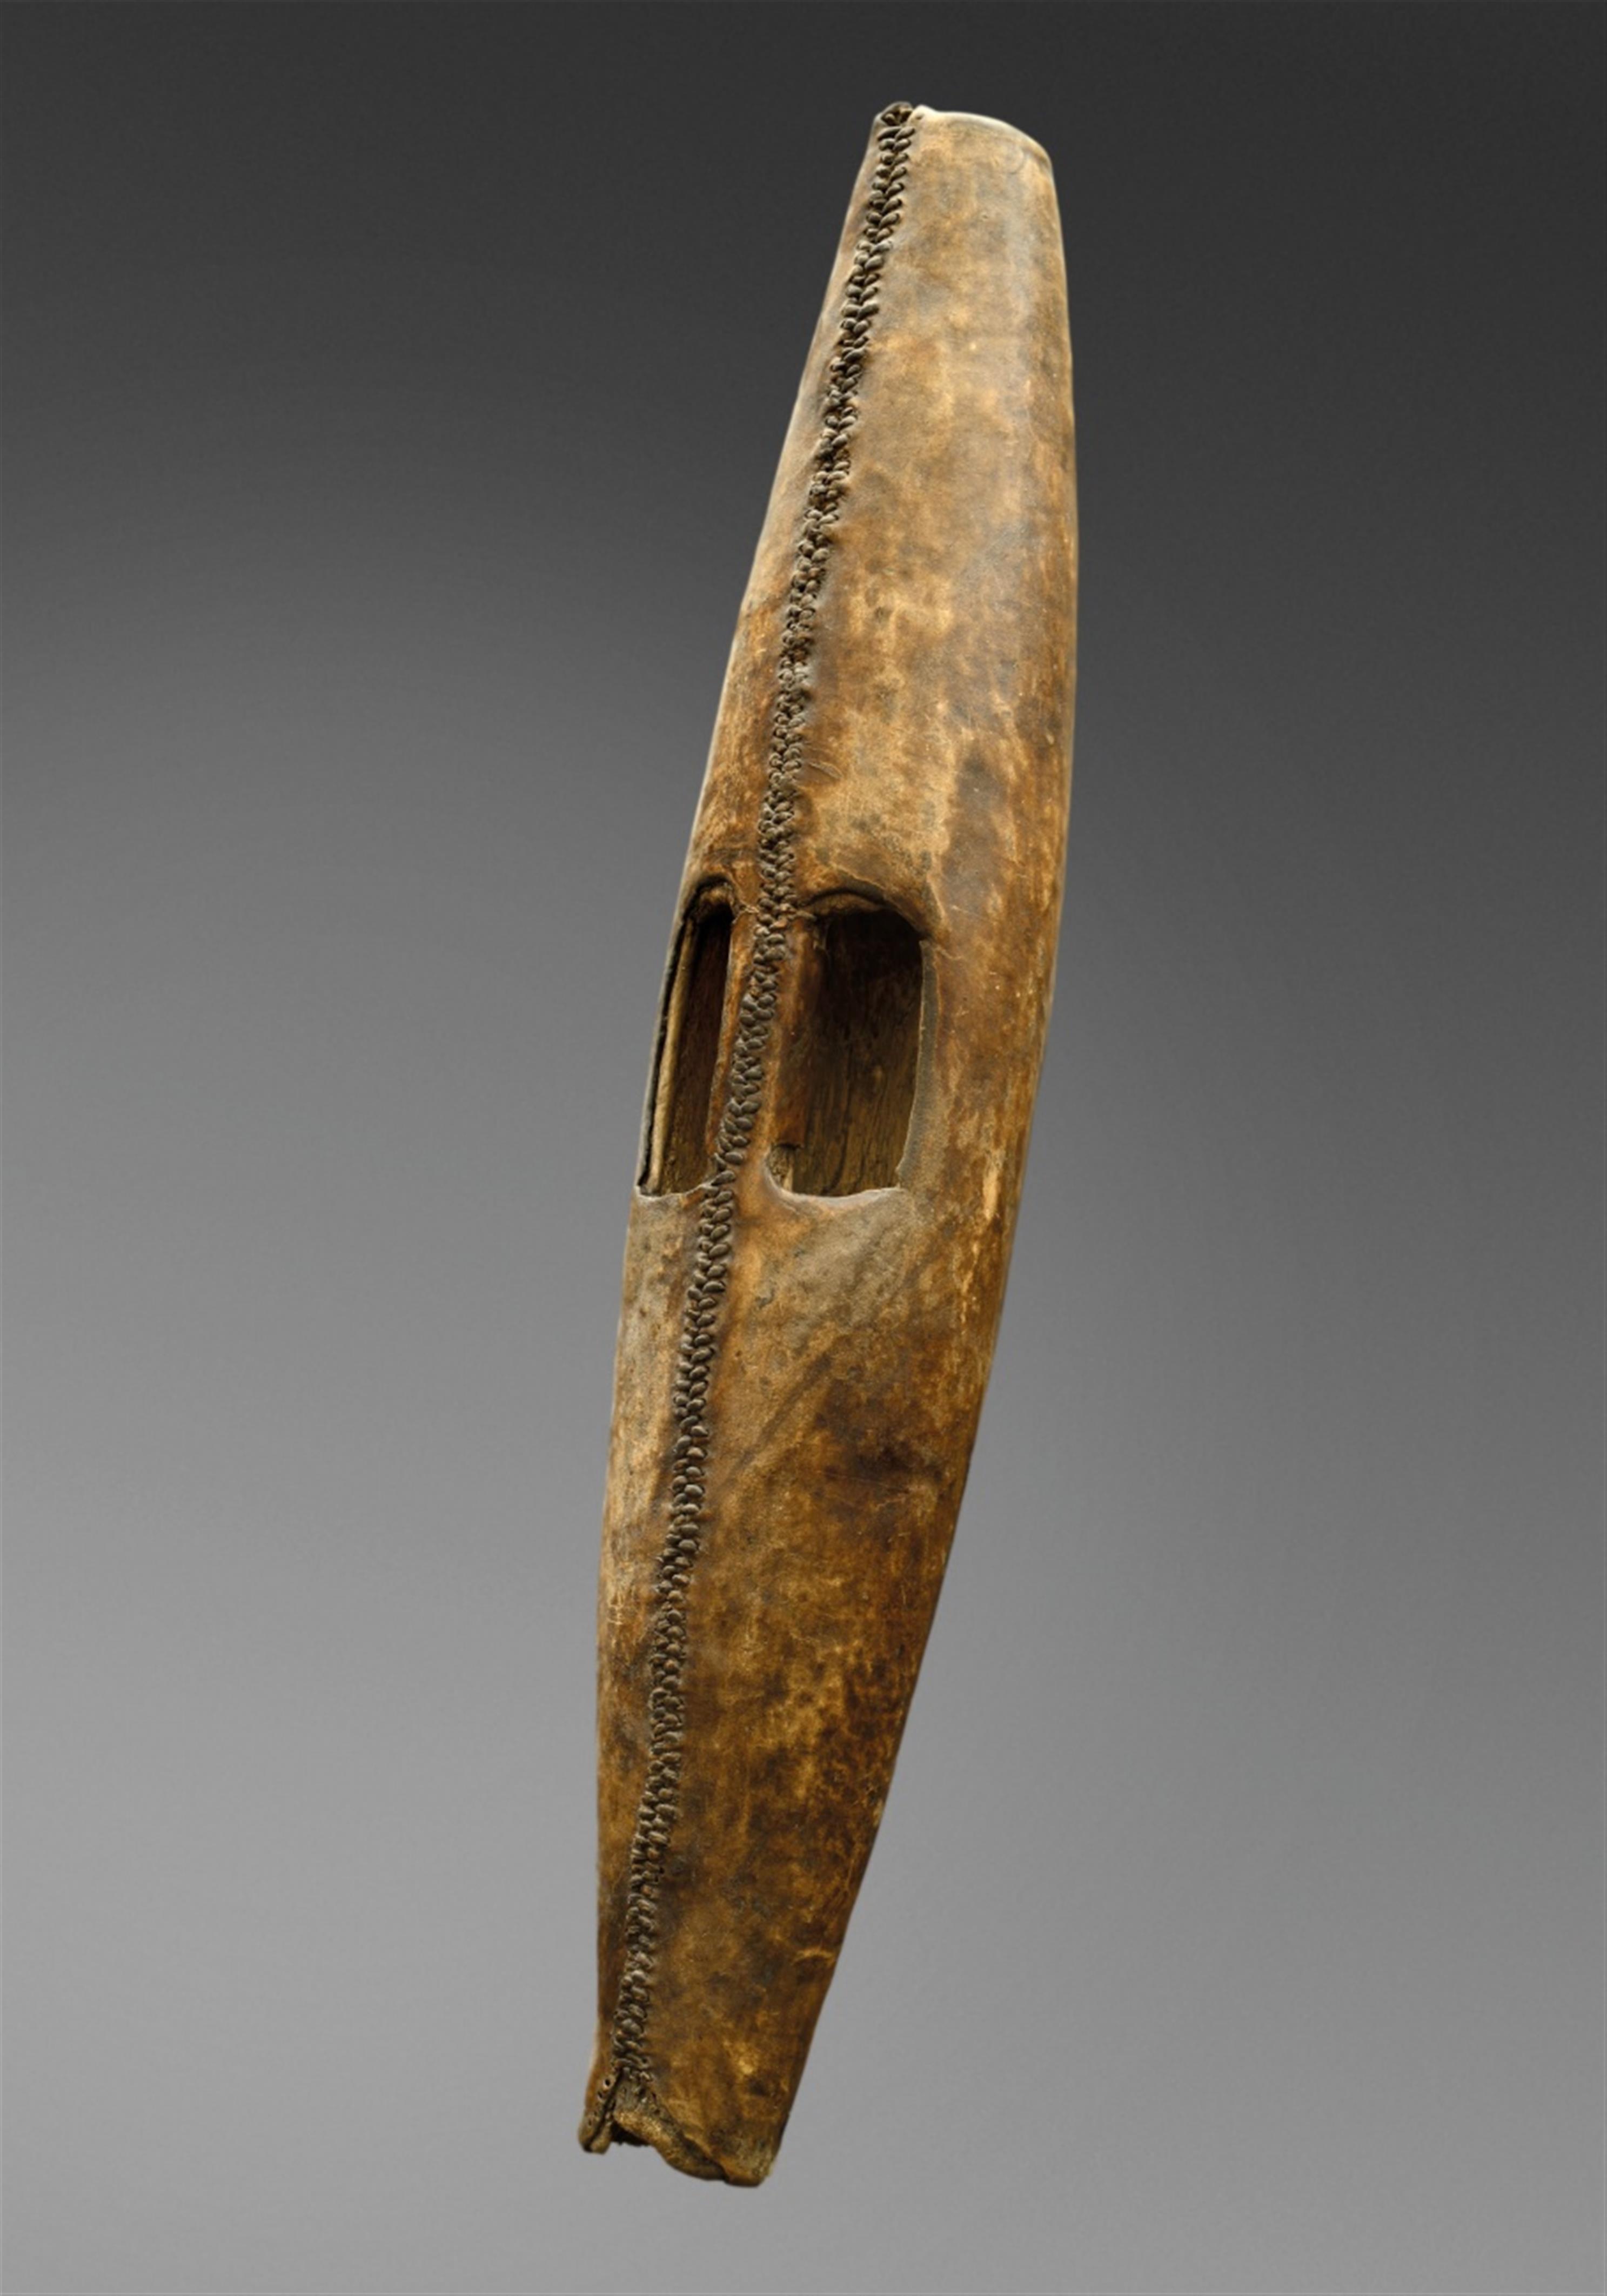 TWO SUDAN SHIELDS A Shilluk shield of cylindrical form tapering at each end, covered in hide, carved grip; and a Dinka shield, of ovoid form with carved grip, dark patina. - image-1